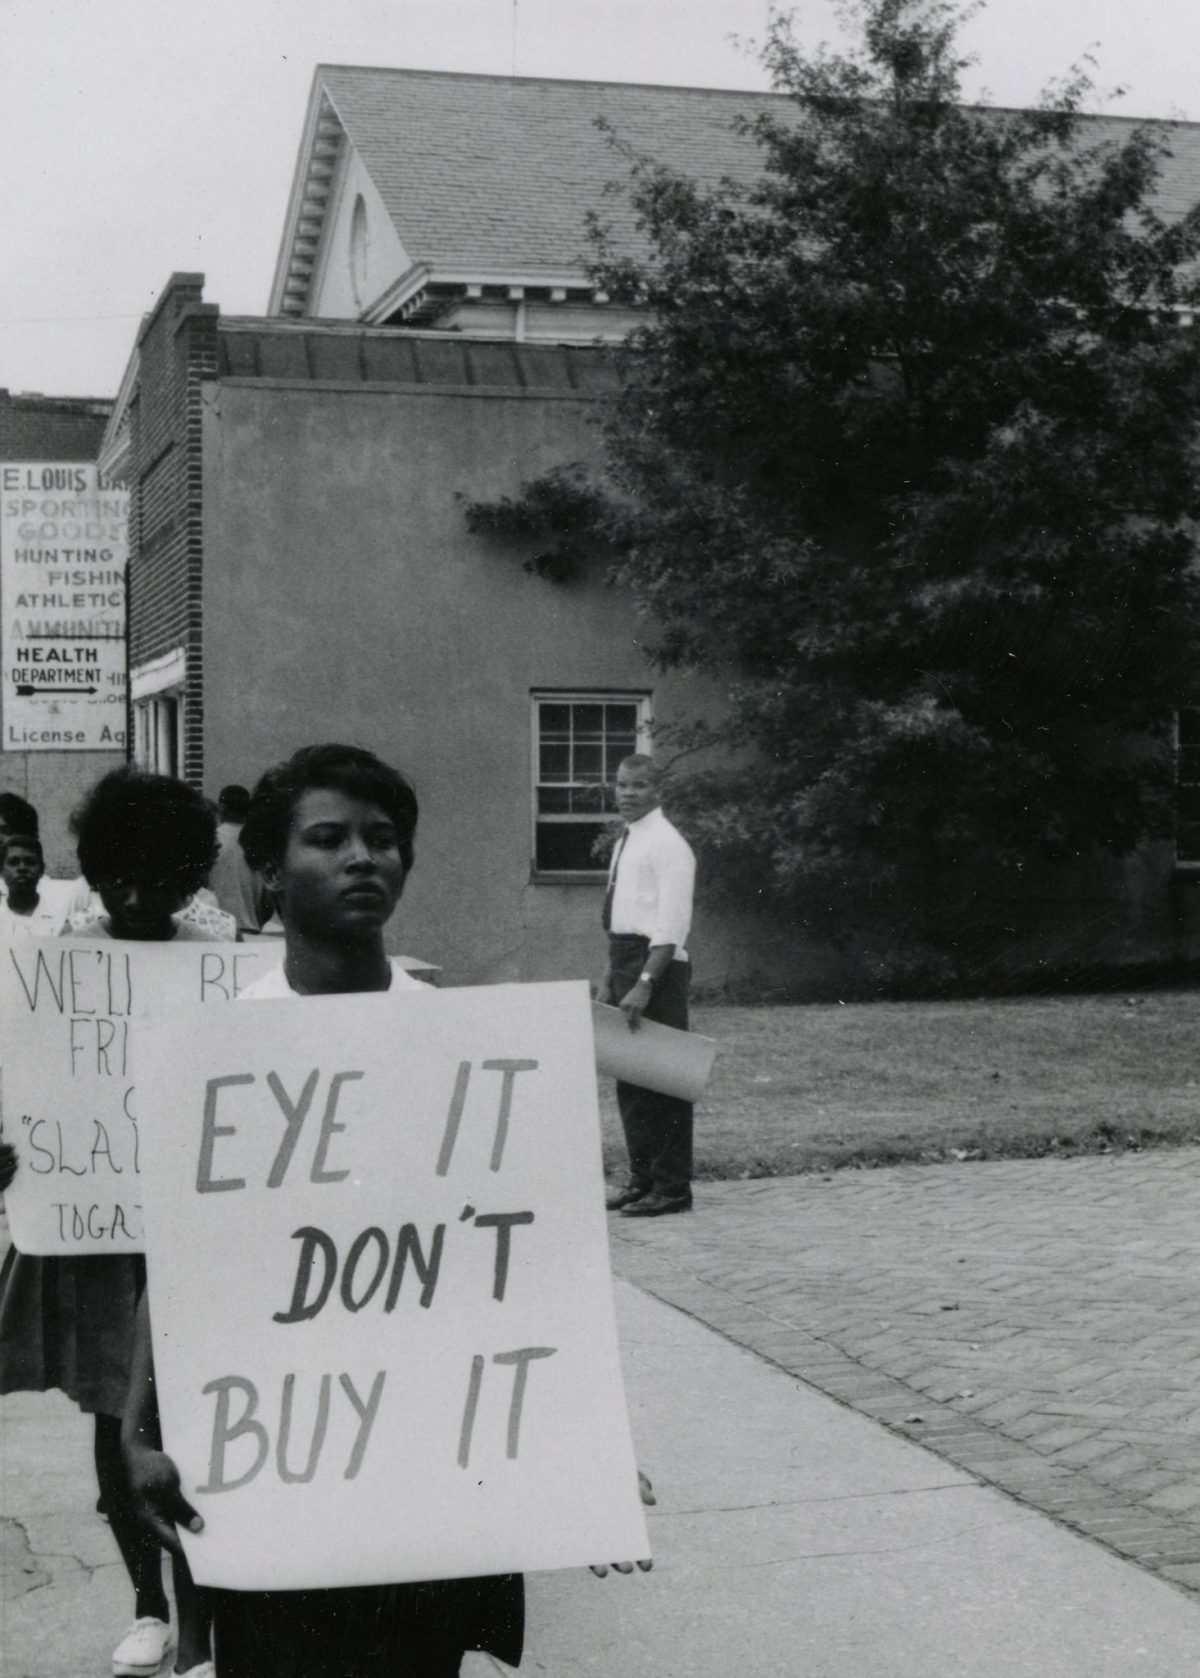 Picketing on Main Street in front of Courthouse, Farmville, Va., July 1963